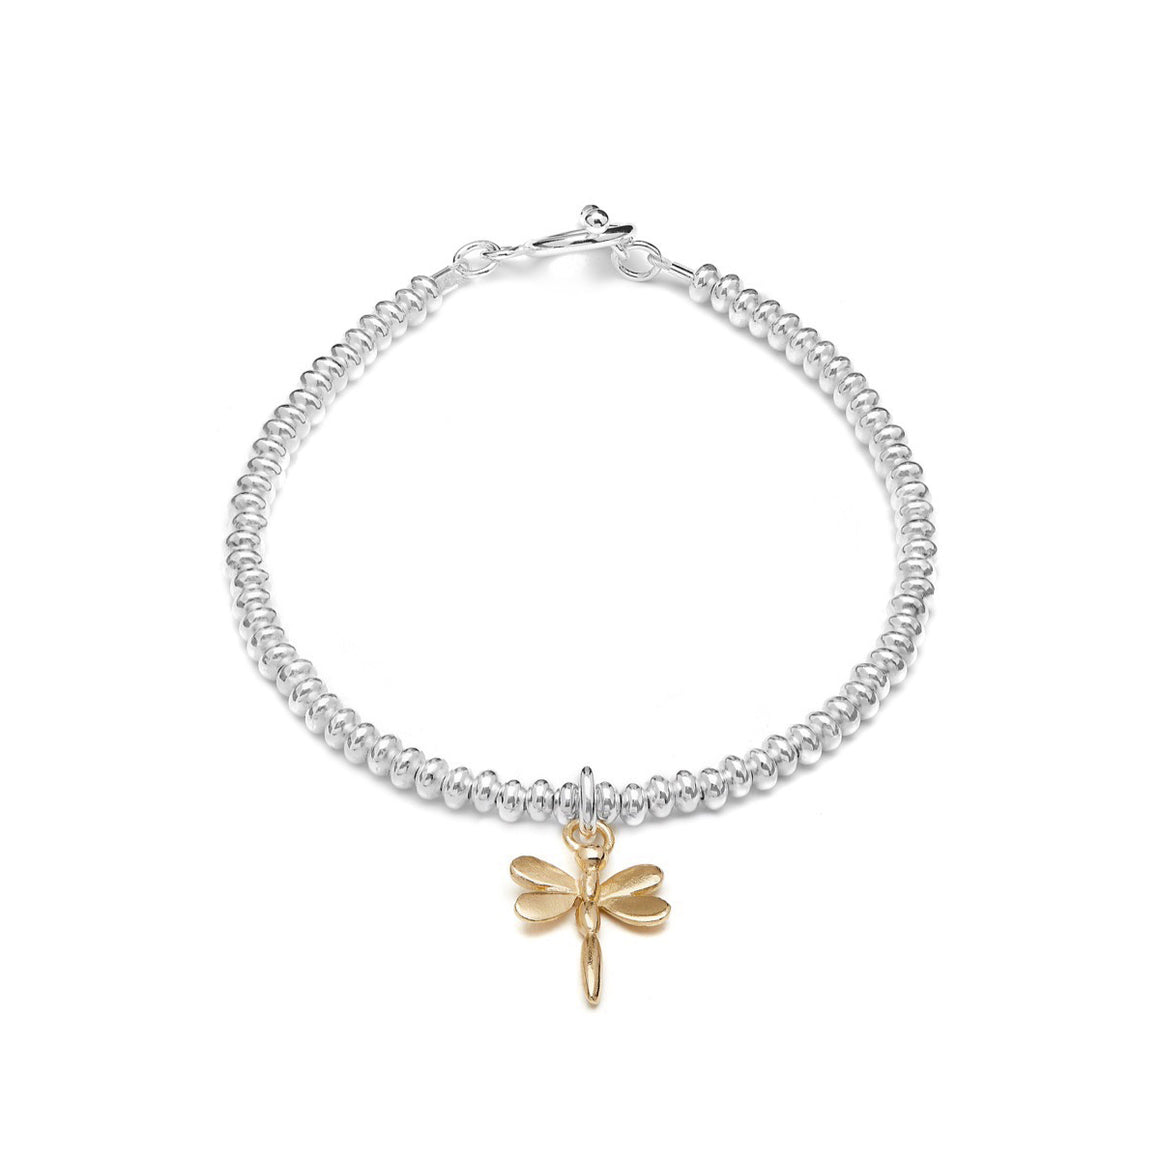 Beaded Bracelet With Gold Dragonfly